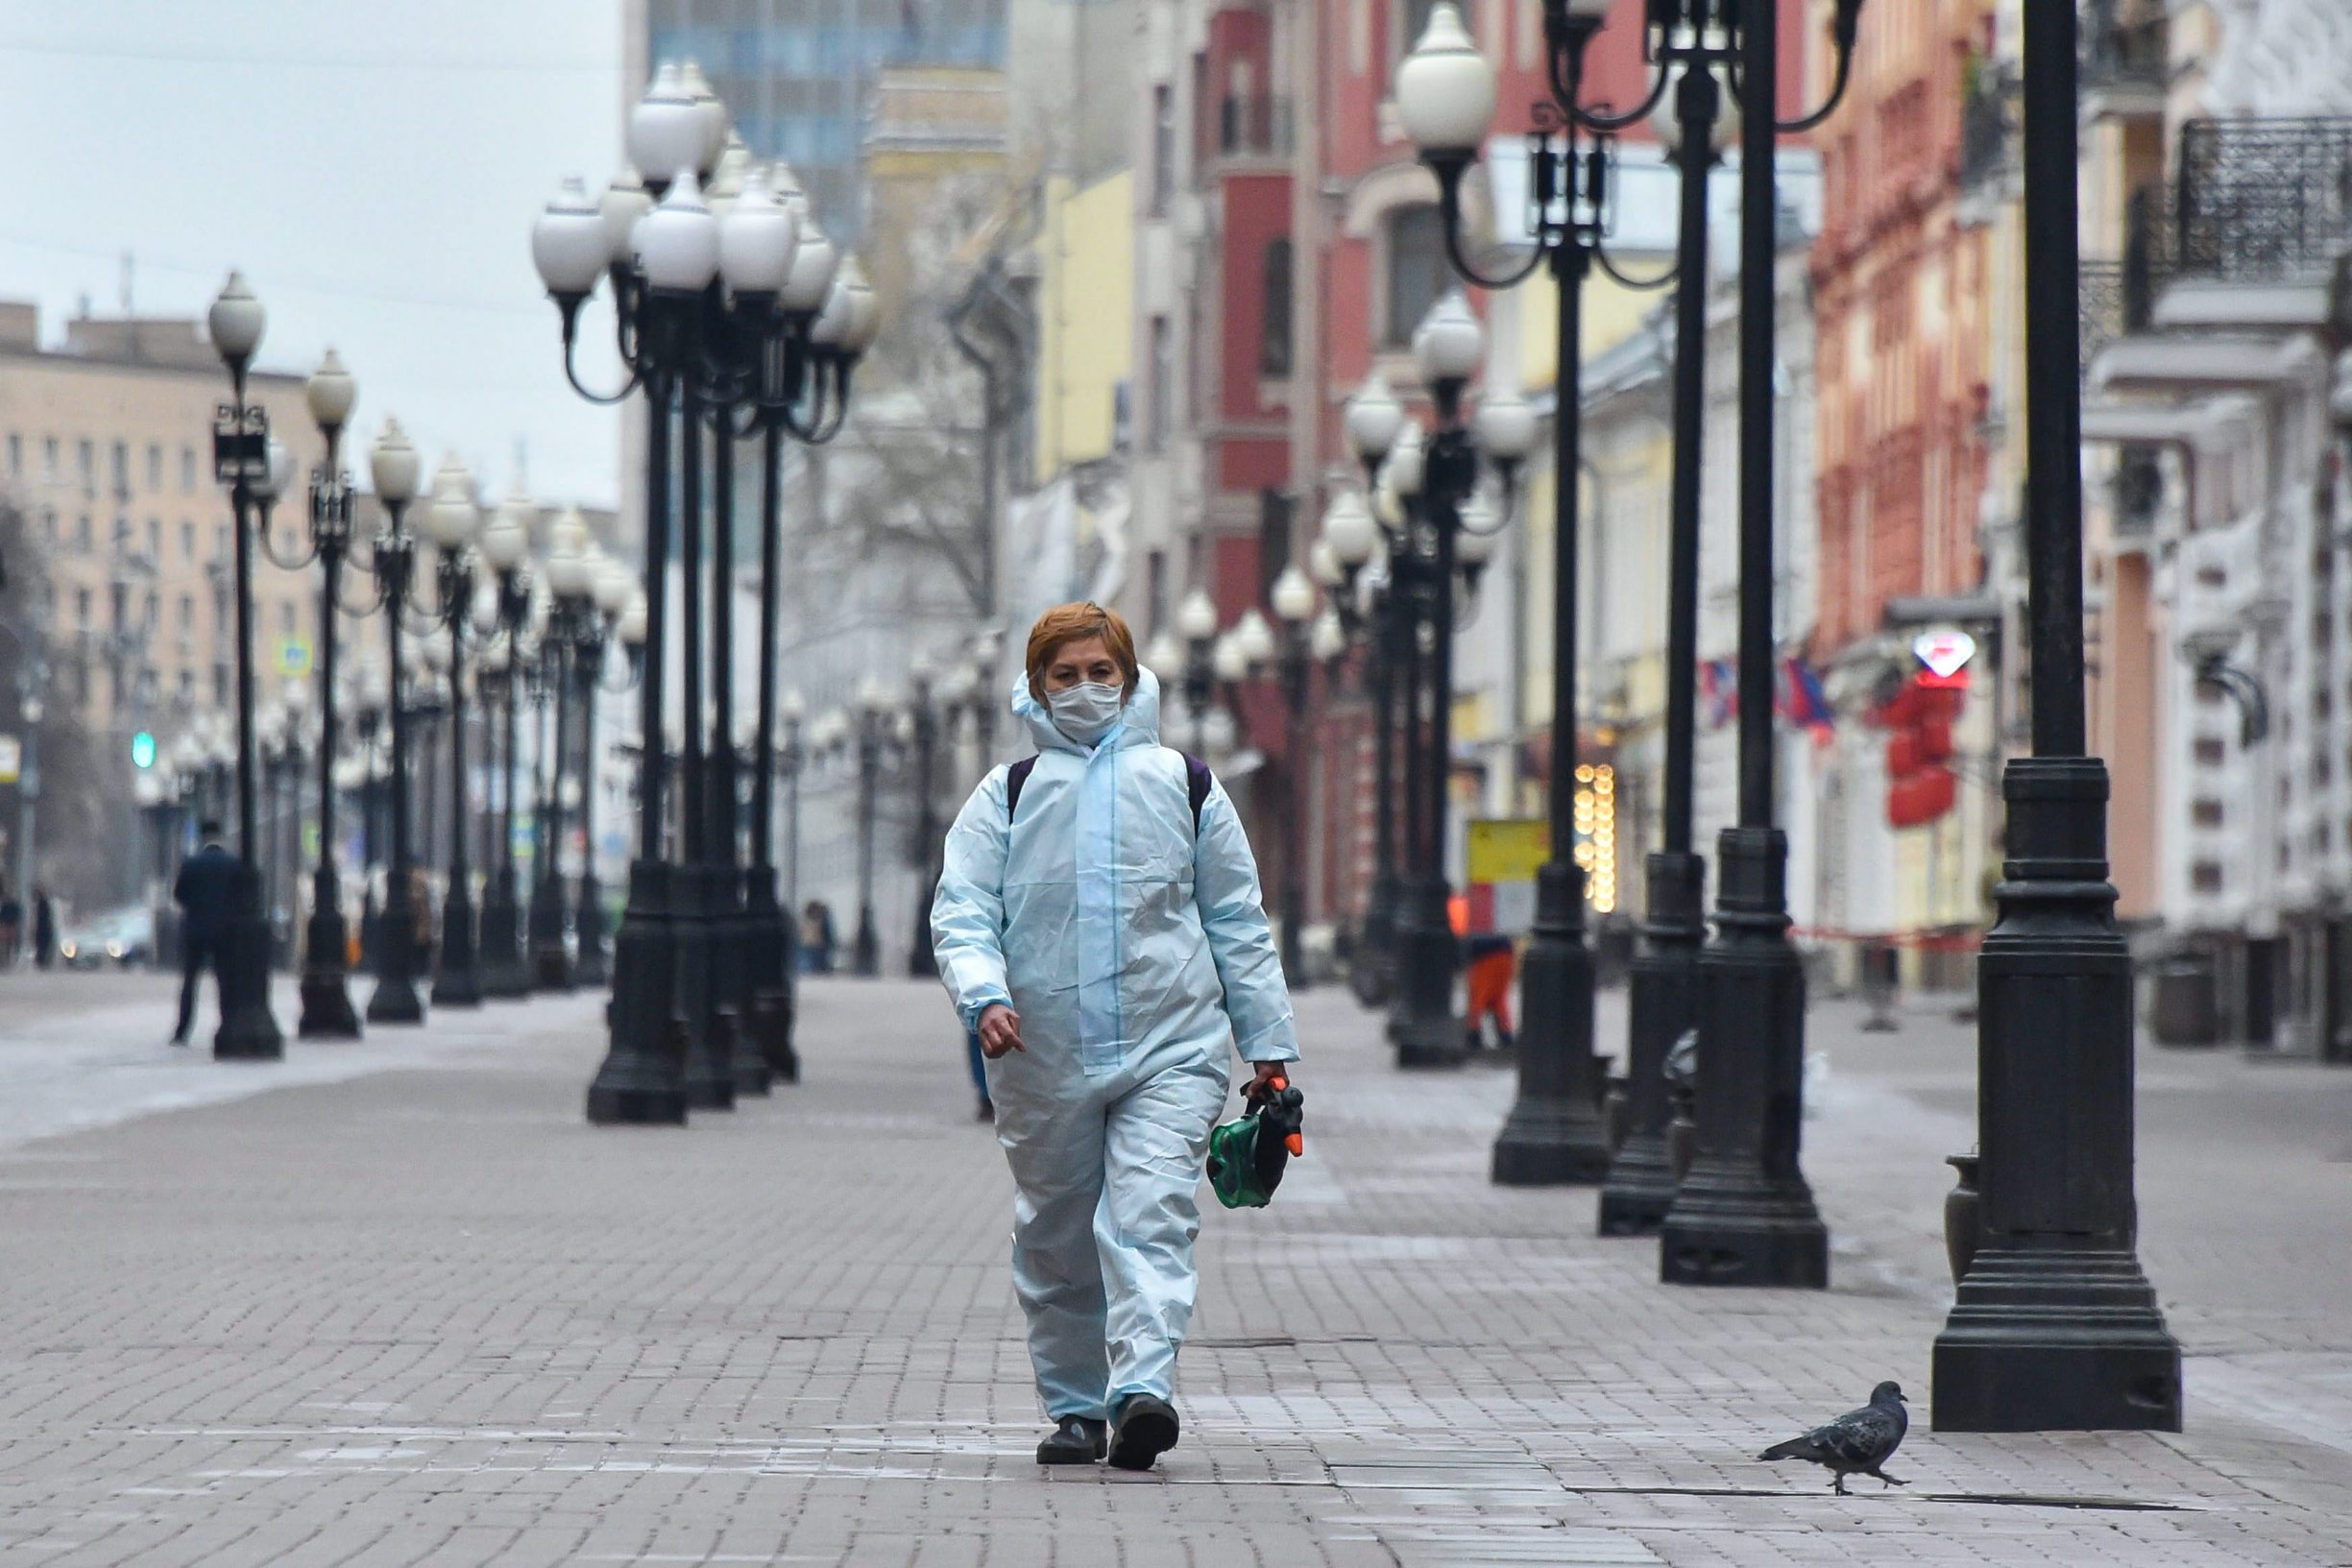 A woman wearing a protective suit carries googles and a disinfectant sprayer as she walks in downtown Moscow on April 8, 2020. (Photo by Vasily MAXIMOV / AFP)